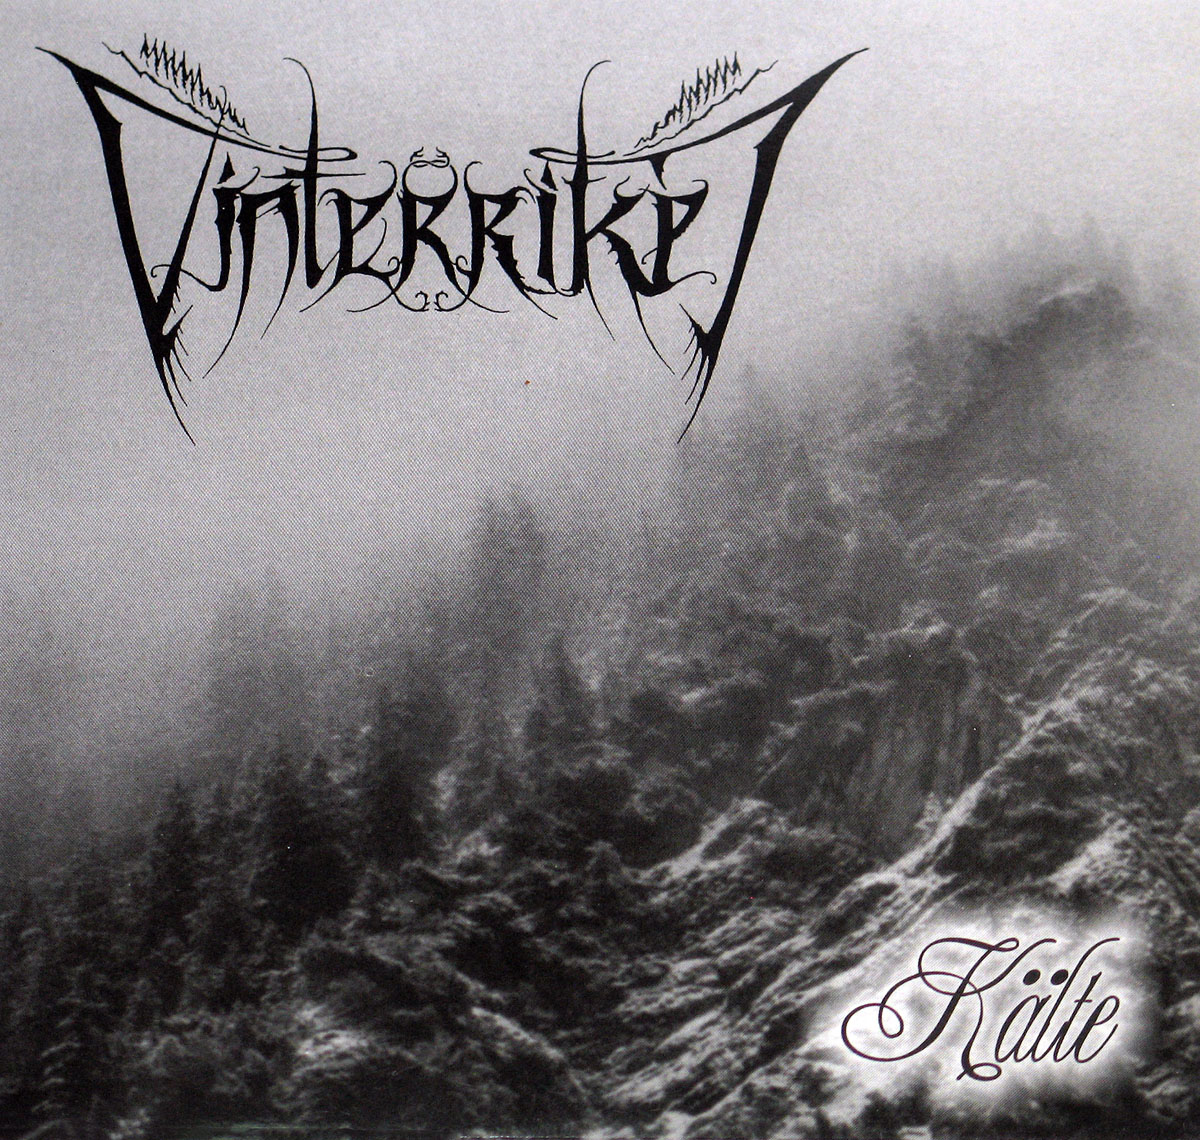 large photo of the album front cover of: Kälte 